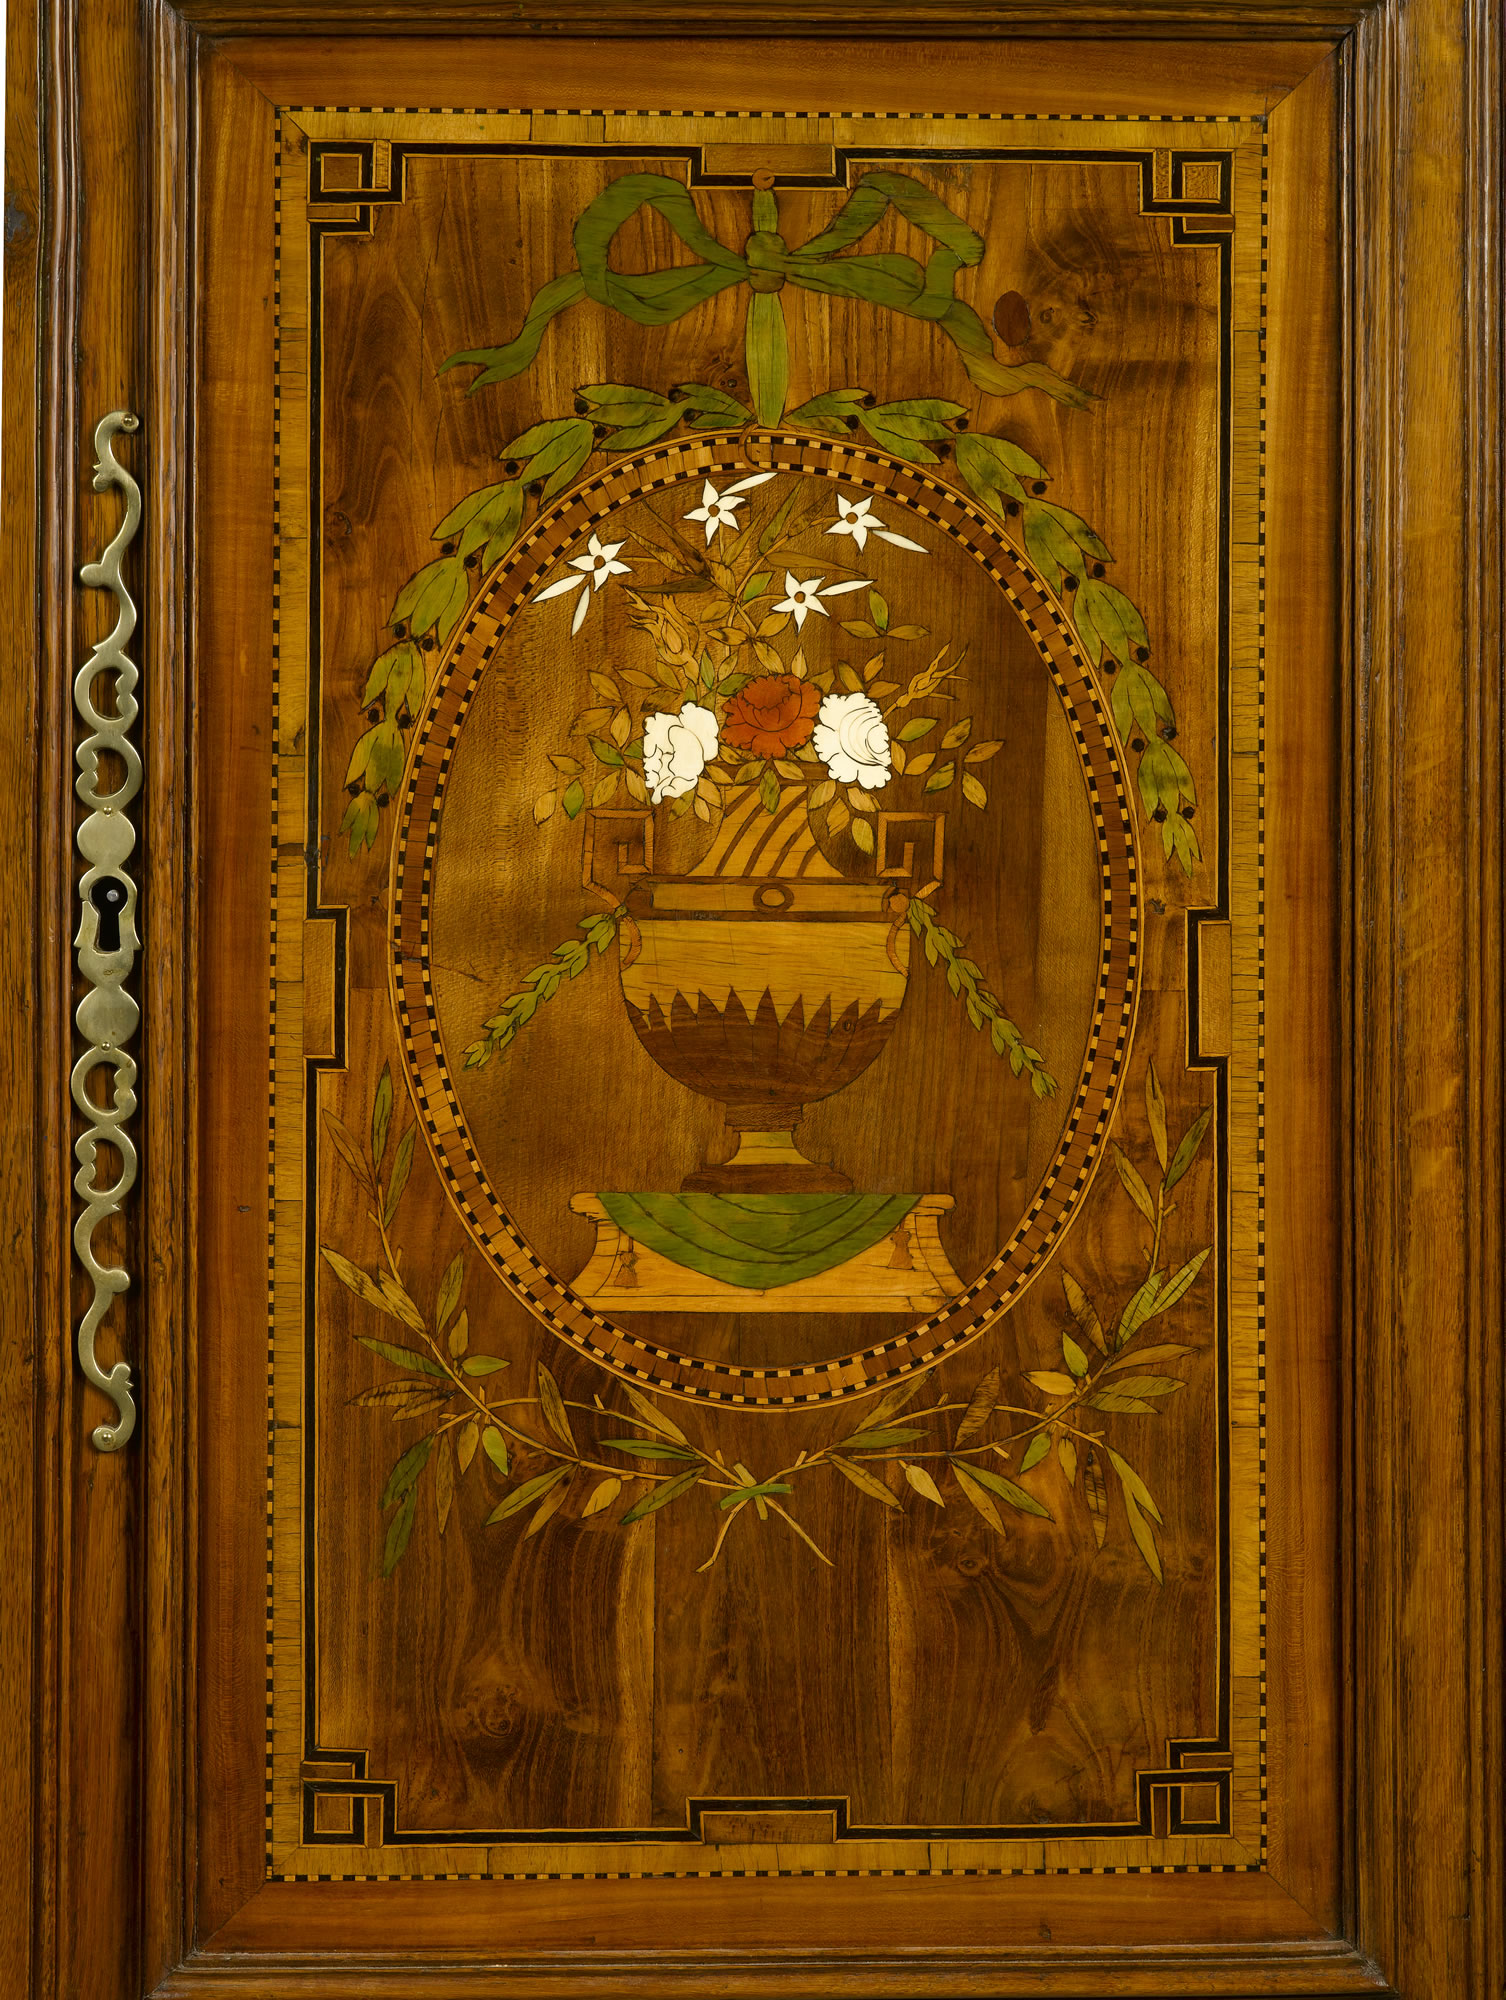 French, Late 18th Century, Fruitwood, Marquetry Armoire from Lorraine